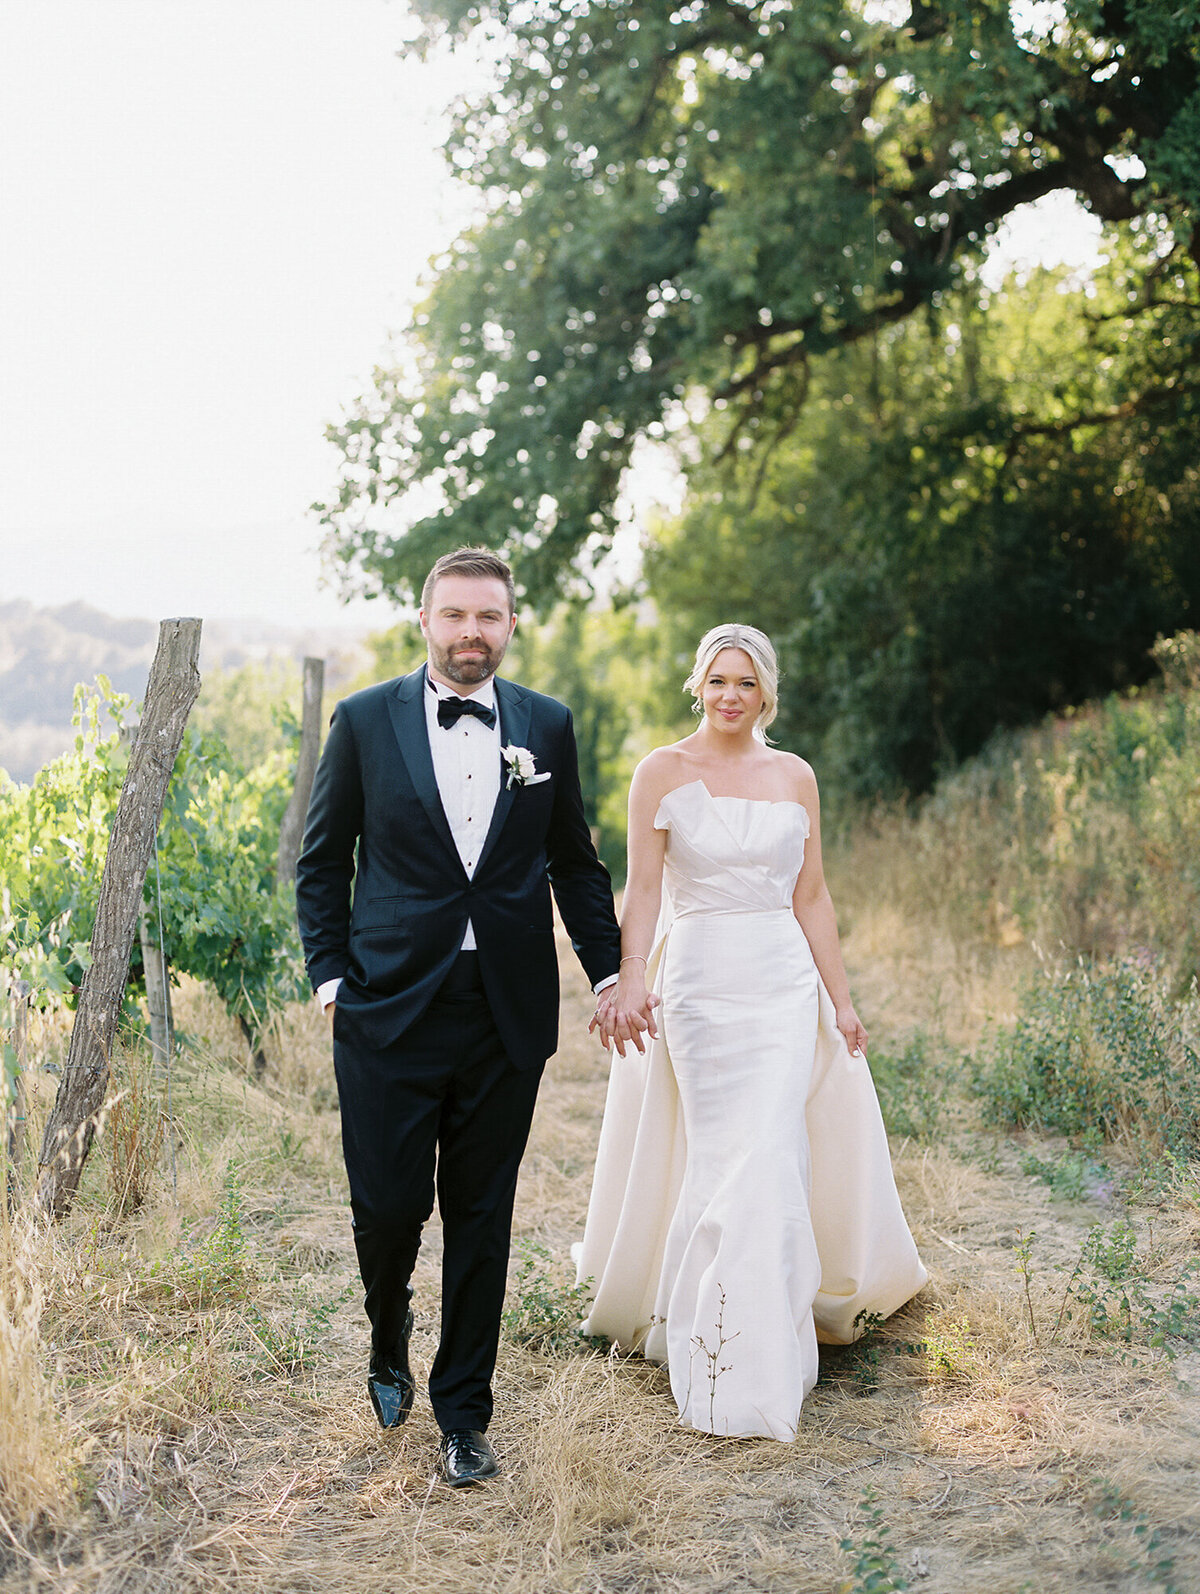 Arielle Peters Photography Tuscany Italy Wedding - 78